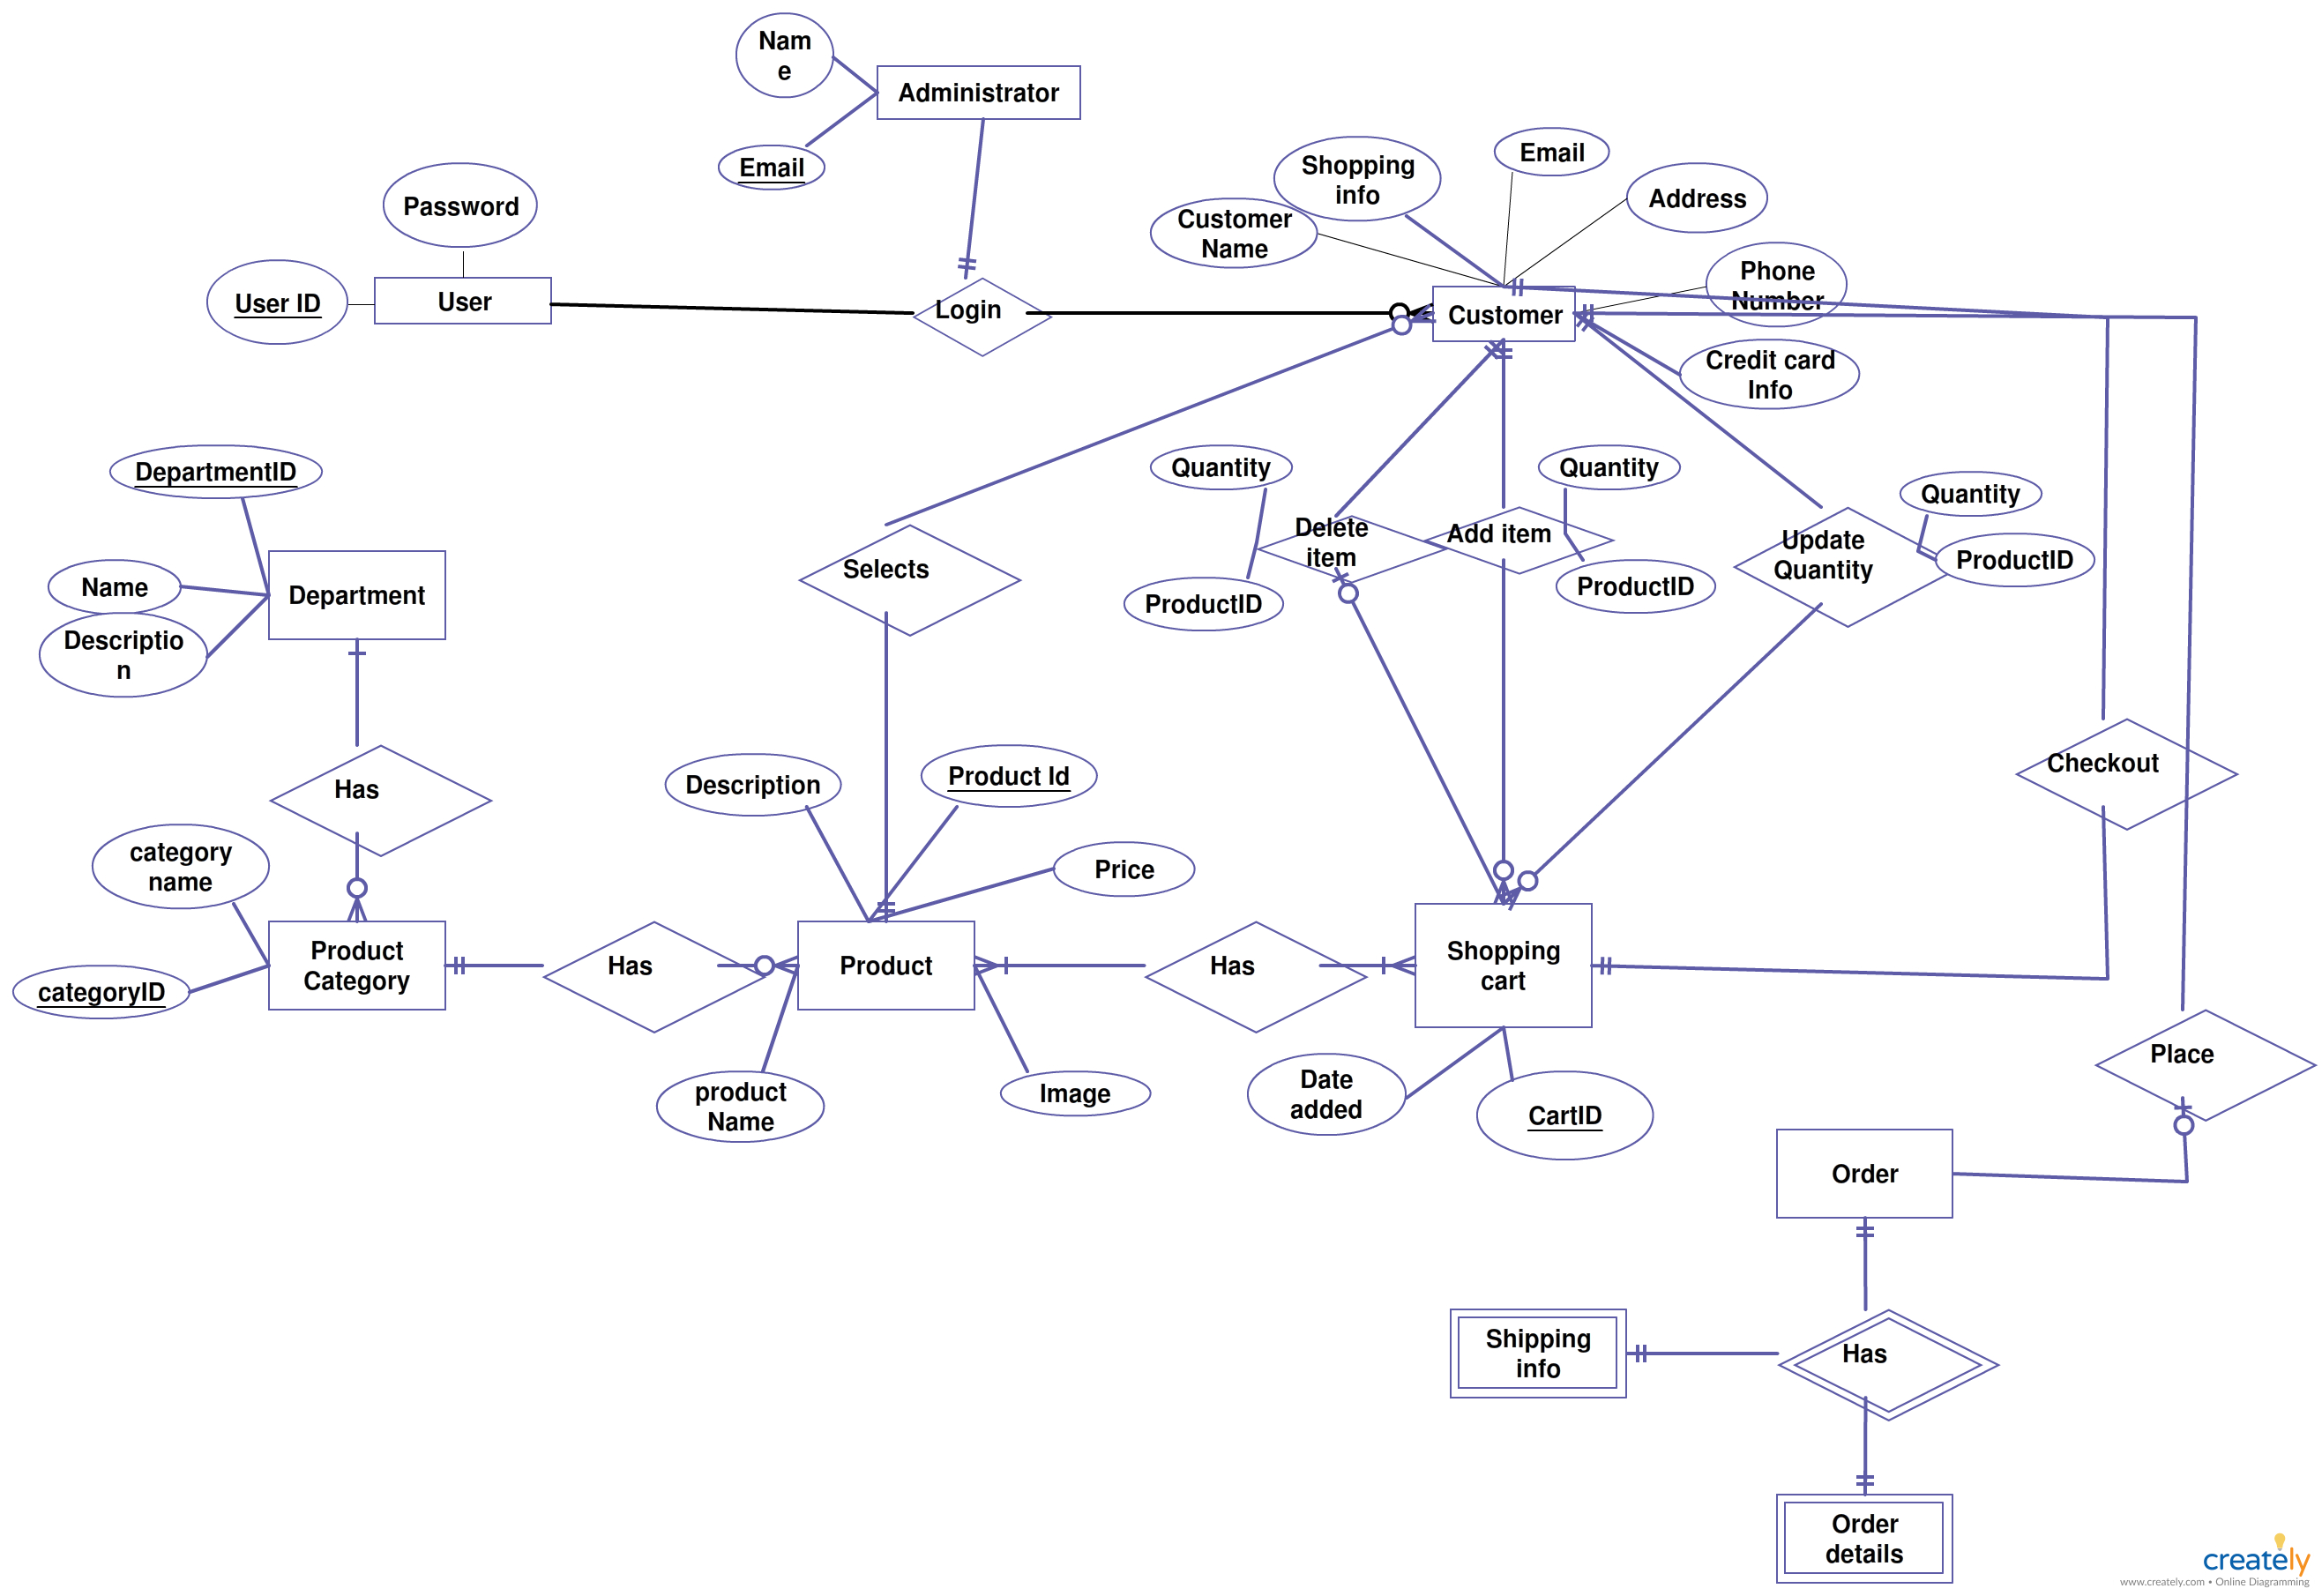 Er Diagrams Help Us To Visualize How Data Is Connected In A General intended for Er Diagram Examples For Travel Agency